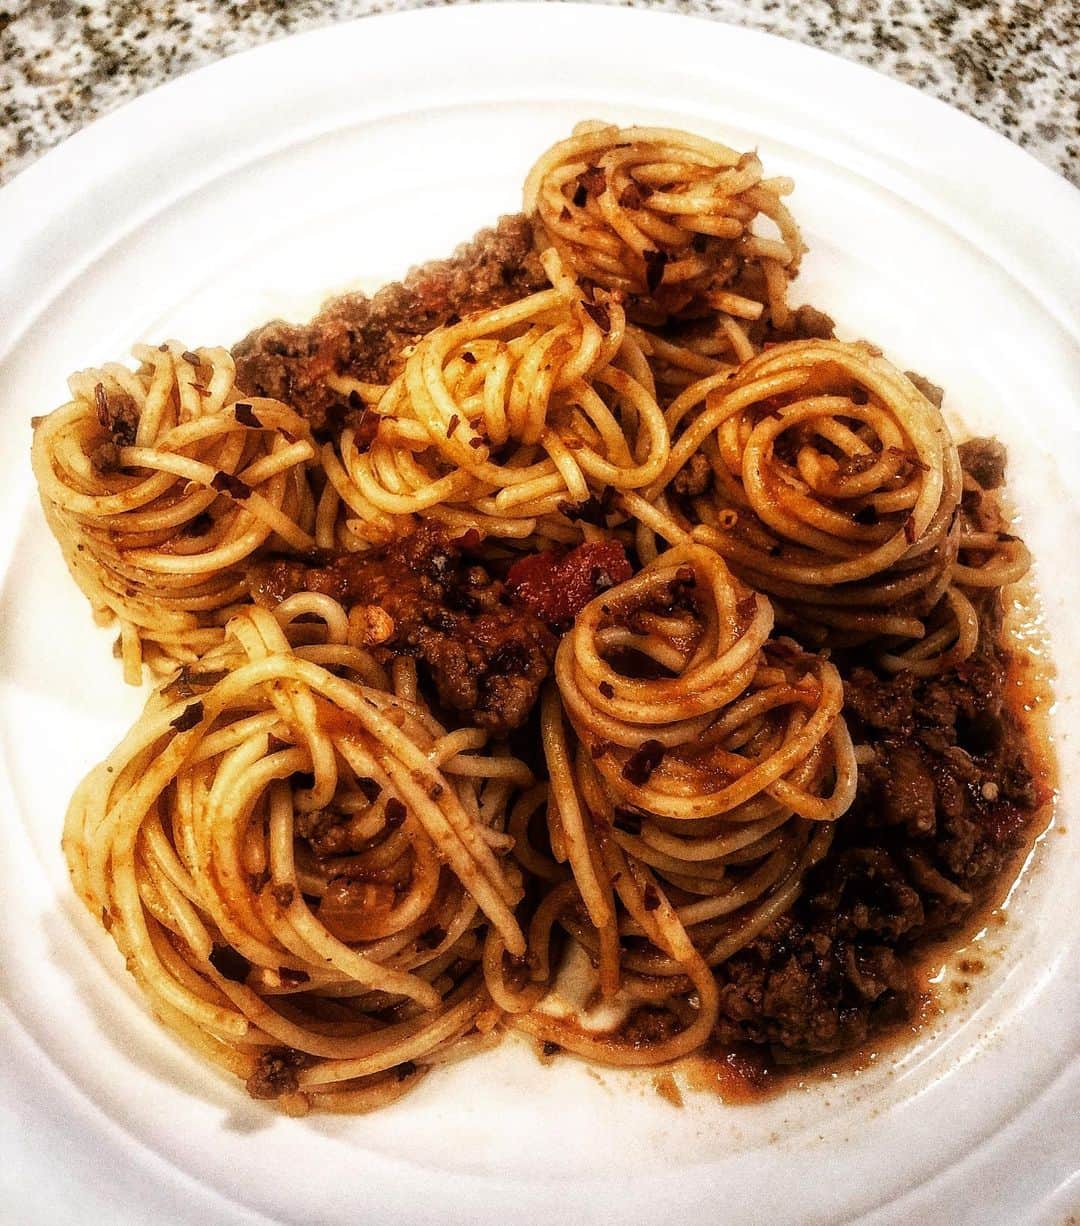 Jada Lalita Patipaksiriのインスタグラム：「Spaghetti + bolognese 🍝 my mom’s bolognese sauce is THE best. It has all the traditional, amazing, savory flavors of your ideal bolognese sauce but with an ever so subtle Asian kick to it. Ugh, we devoured it with a glass of wine 🍽🍷 #Pasta #noodles #tasty #dinner #yum #foodpics #foodie #yummy #cheatday #thaispice #food #thaifood #cooking #thailand #dinner #spicyfood #wine #authenticthai #recipe #cooking #rice #spicy #kitchen #cookbook #chef #italian」